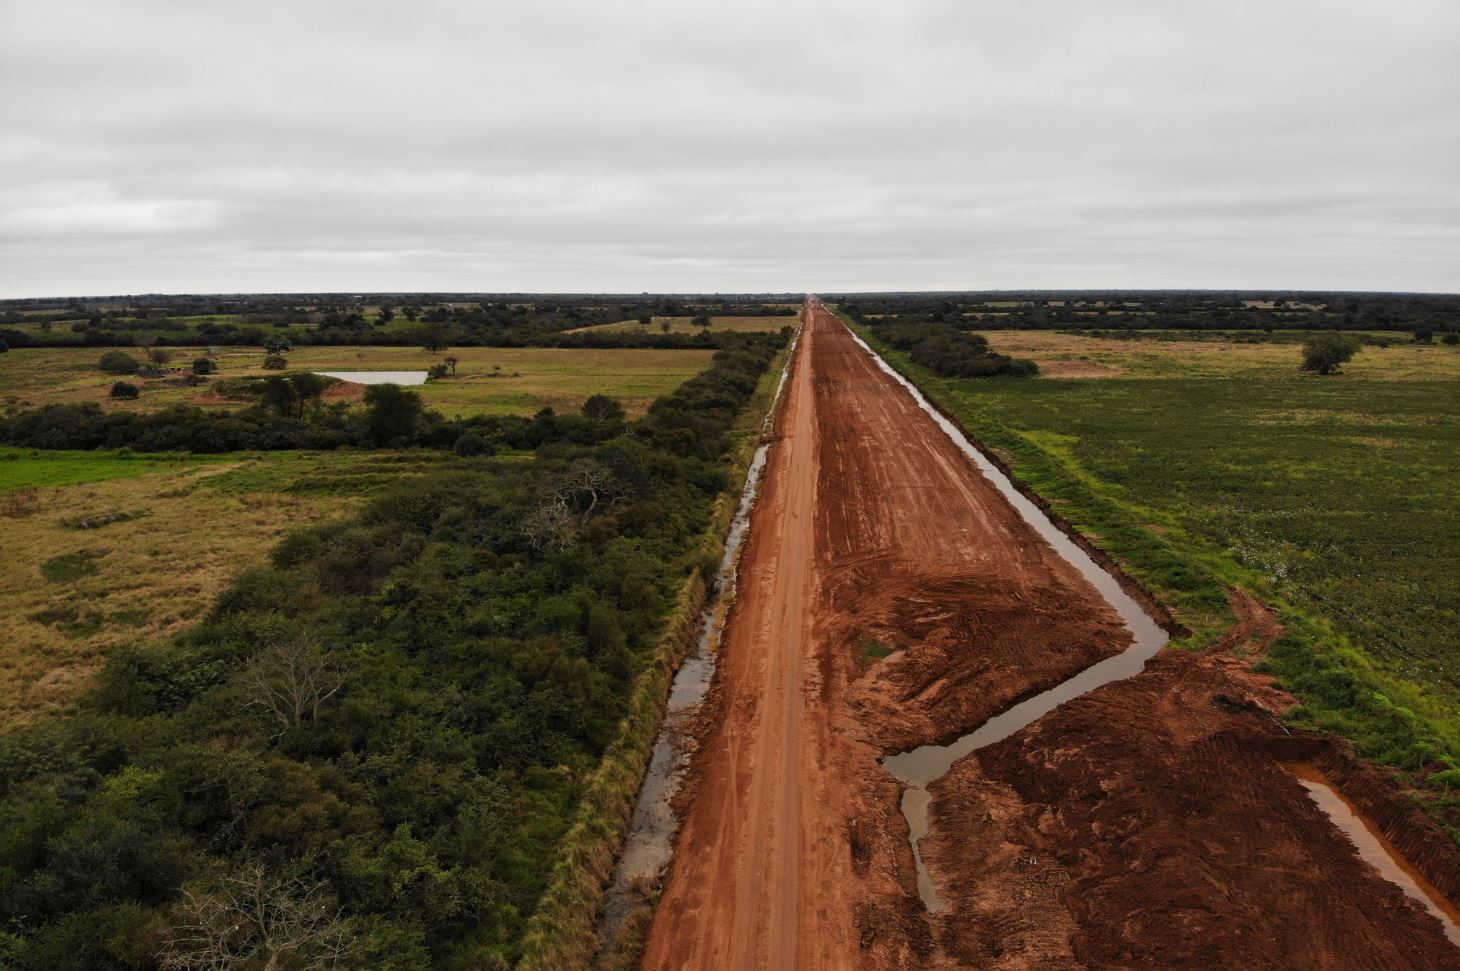 Mennonites helped turn Paraguay into a mega beef producer – indigenous people may pay the price